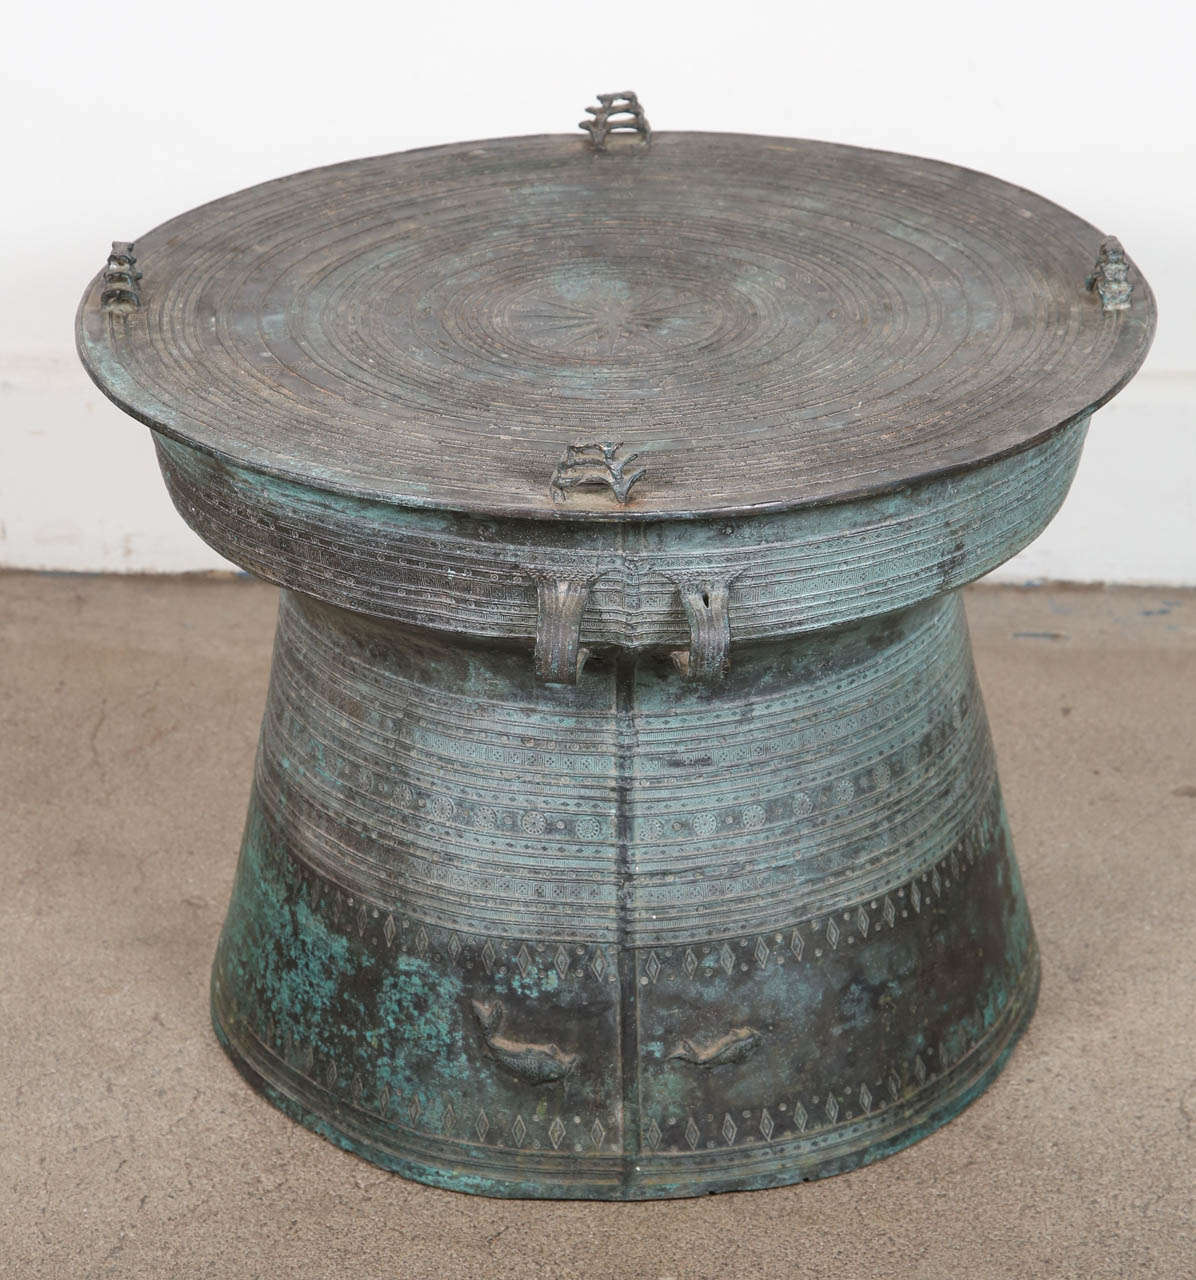 Cast bronze rain drums with the traditional intricate detailing and patterns carved all around both the body and the top. The top is flat centered with a raised star surrounded by concentric geometric patterned bands and with raised triple frog